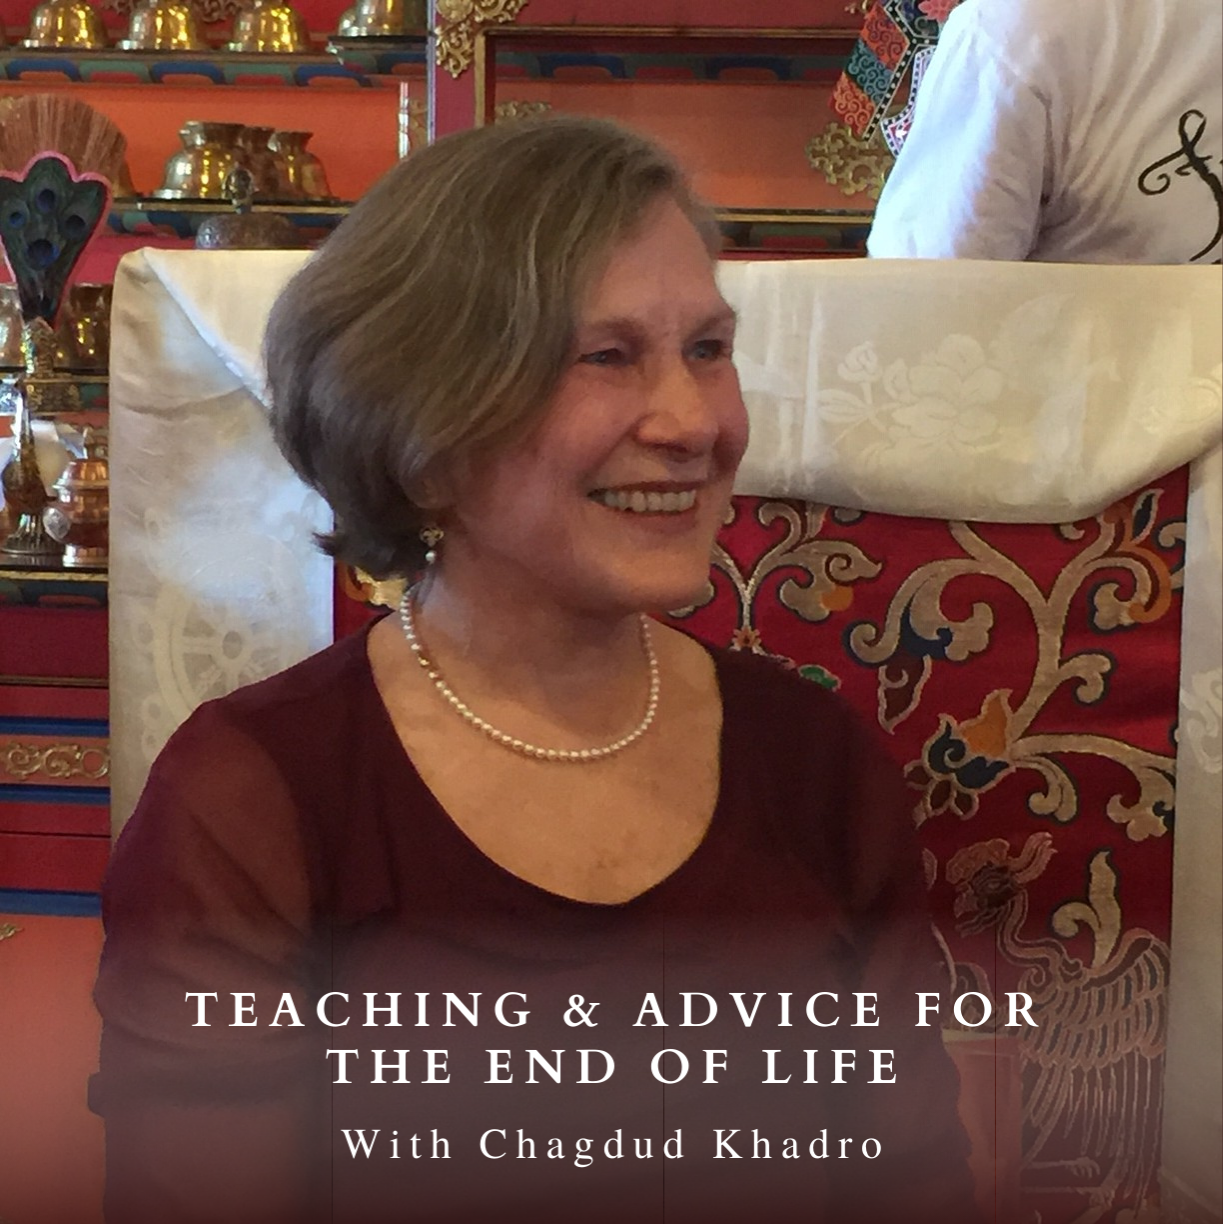 Teaching & Advice for the End of Life with Chagdud Khadro - DVD